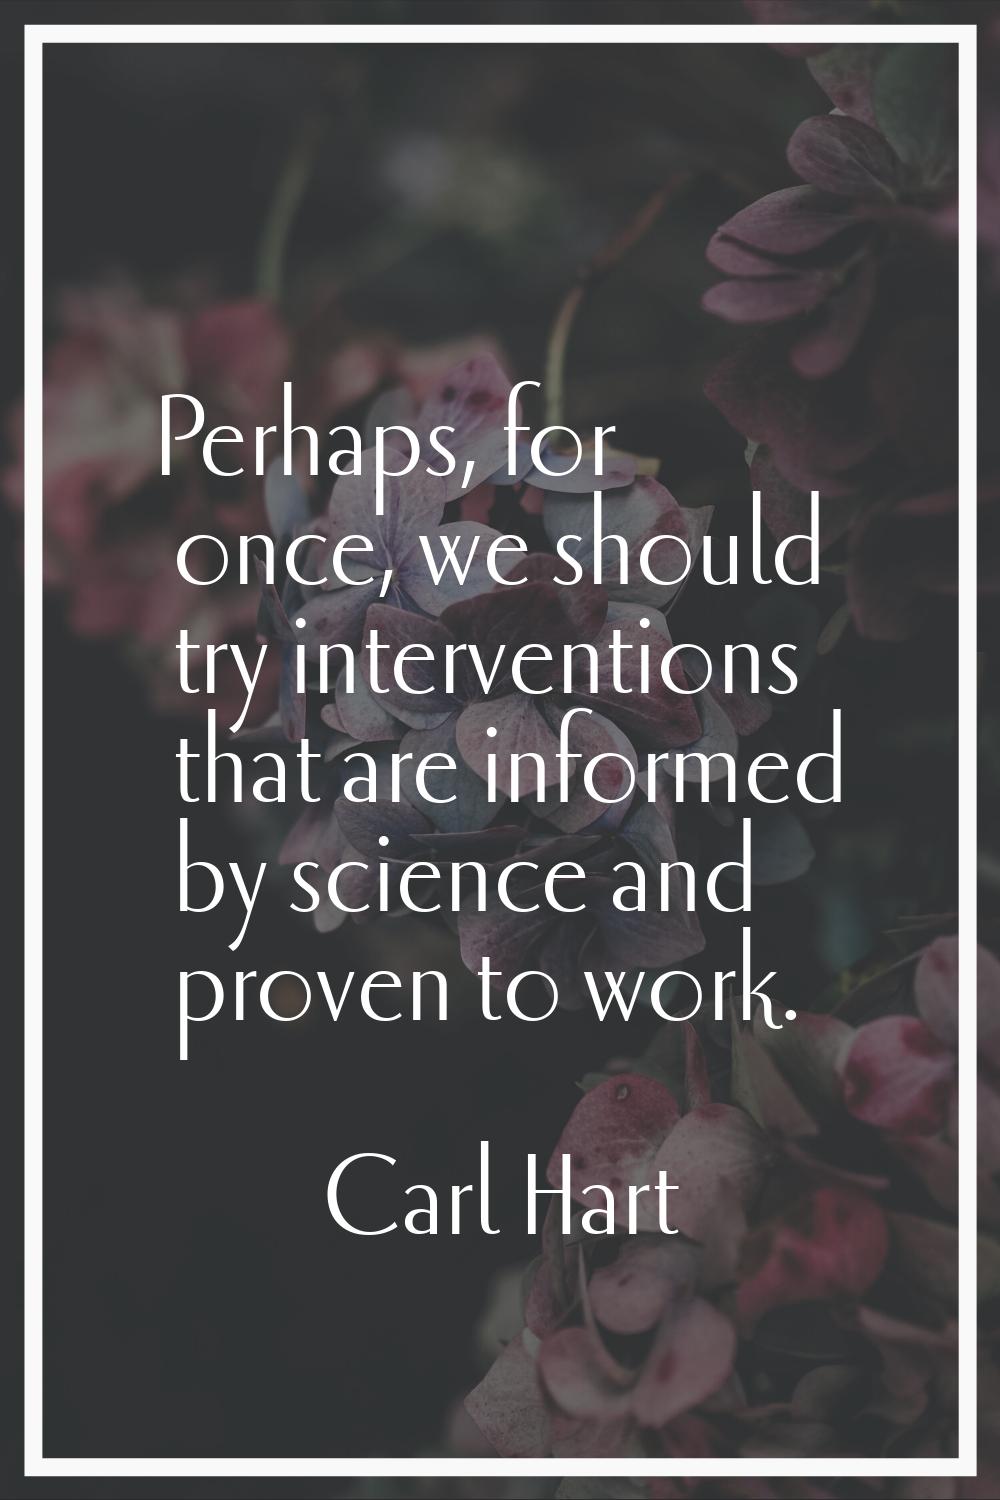 Perhaps, for once, we should try interventions that are informed by science and proven to work.